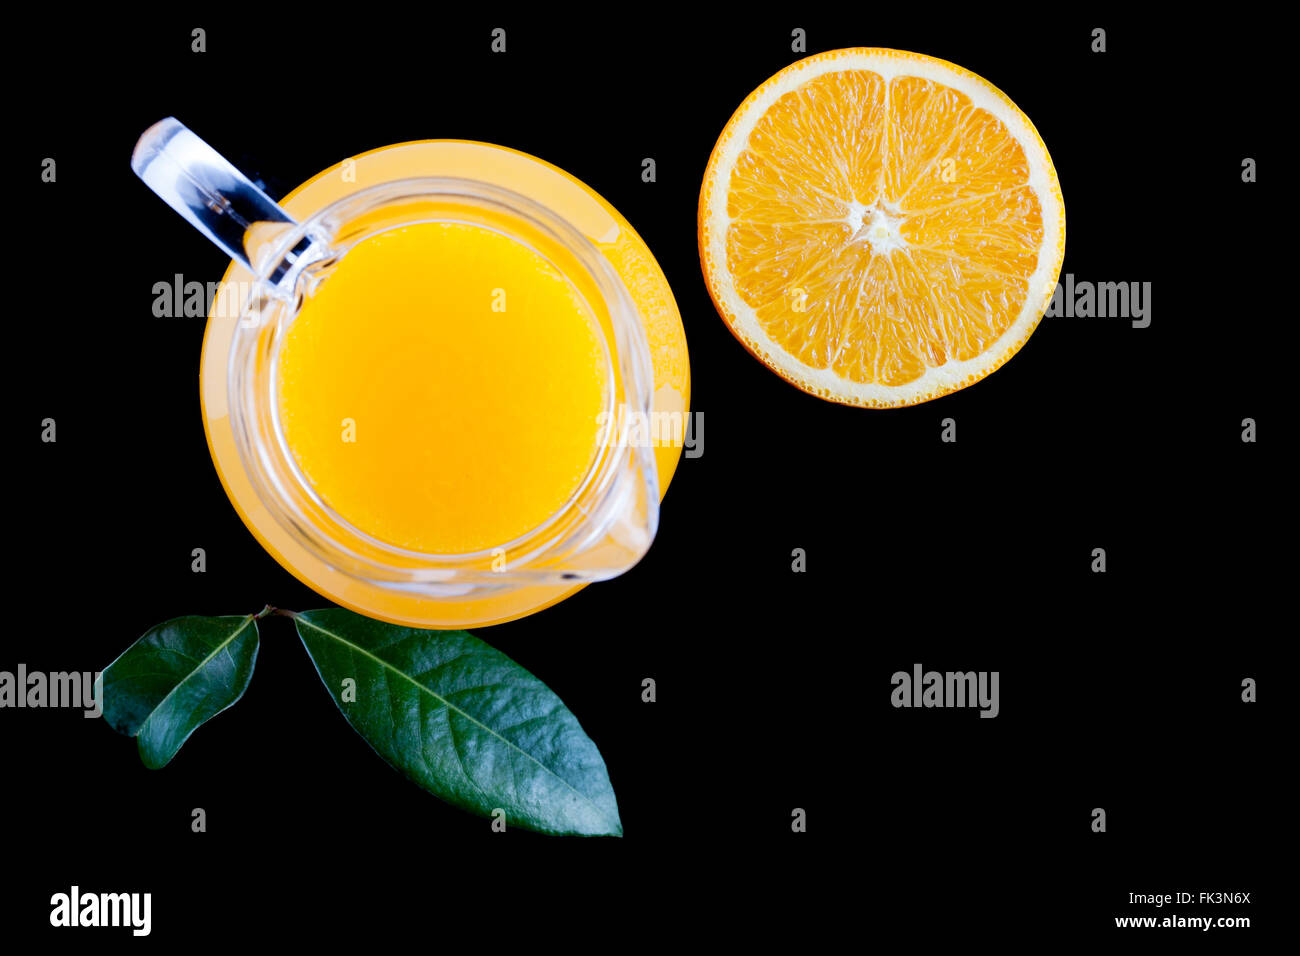 Jug and glass with orange juice isolated on white Stock Photo by ©alphacell  64390501